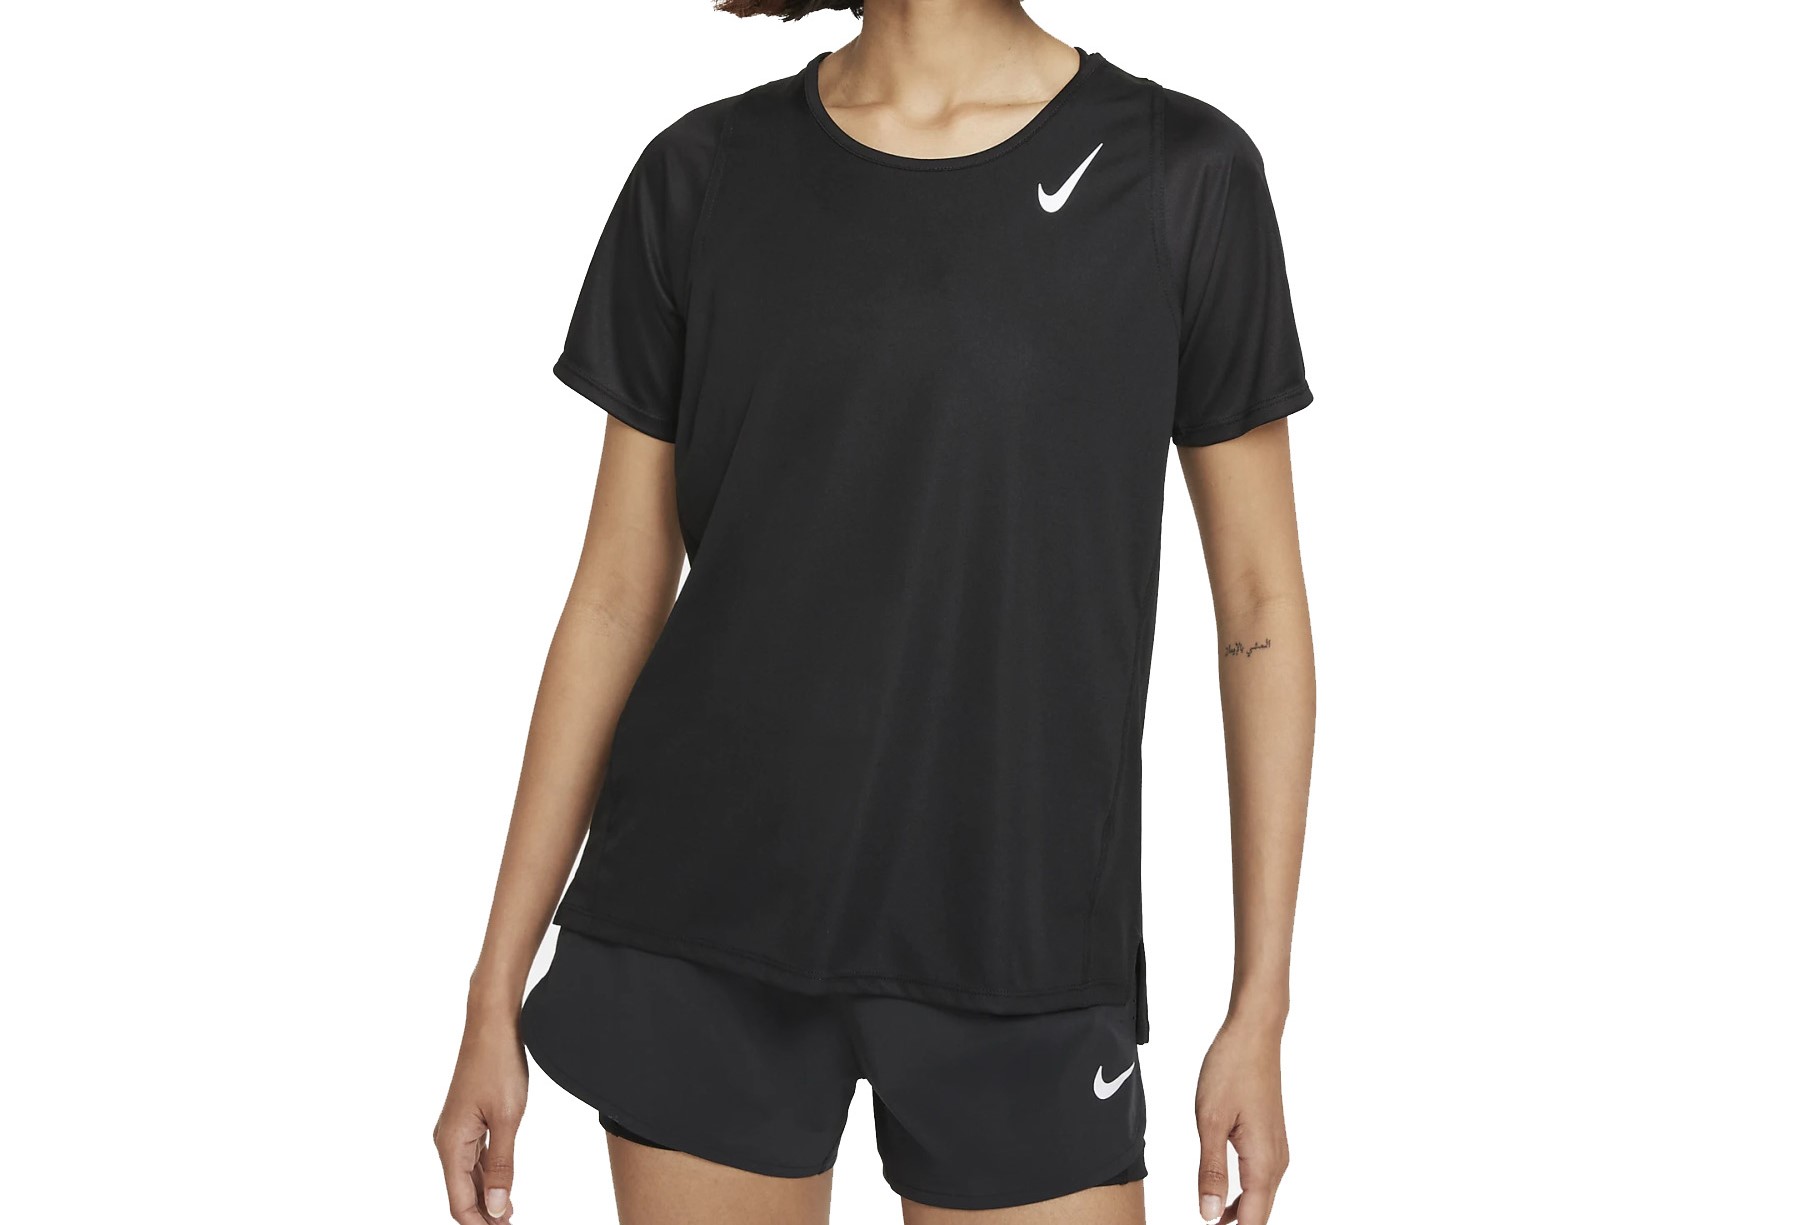 Picture of Nike Dri-Fit Race Short-Sleeve Running Top Women - black/reflective silver DD5927-010